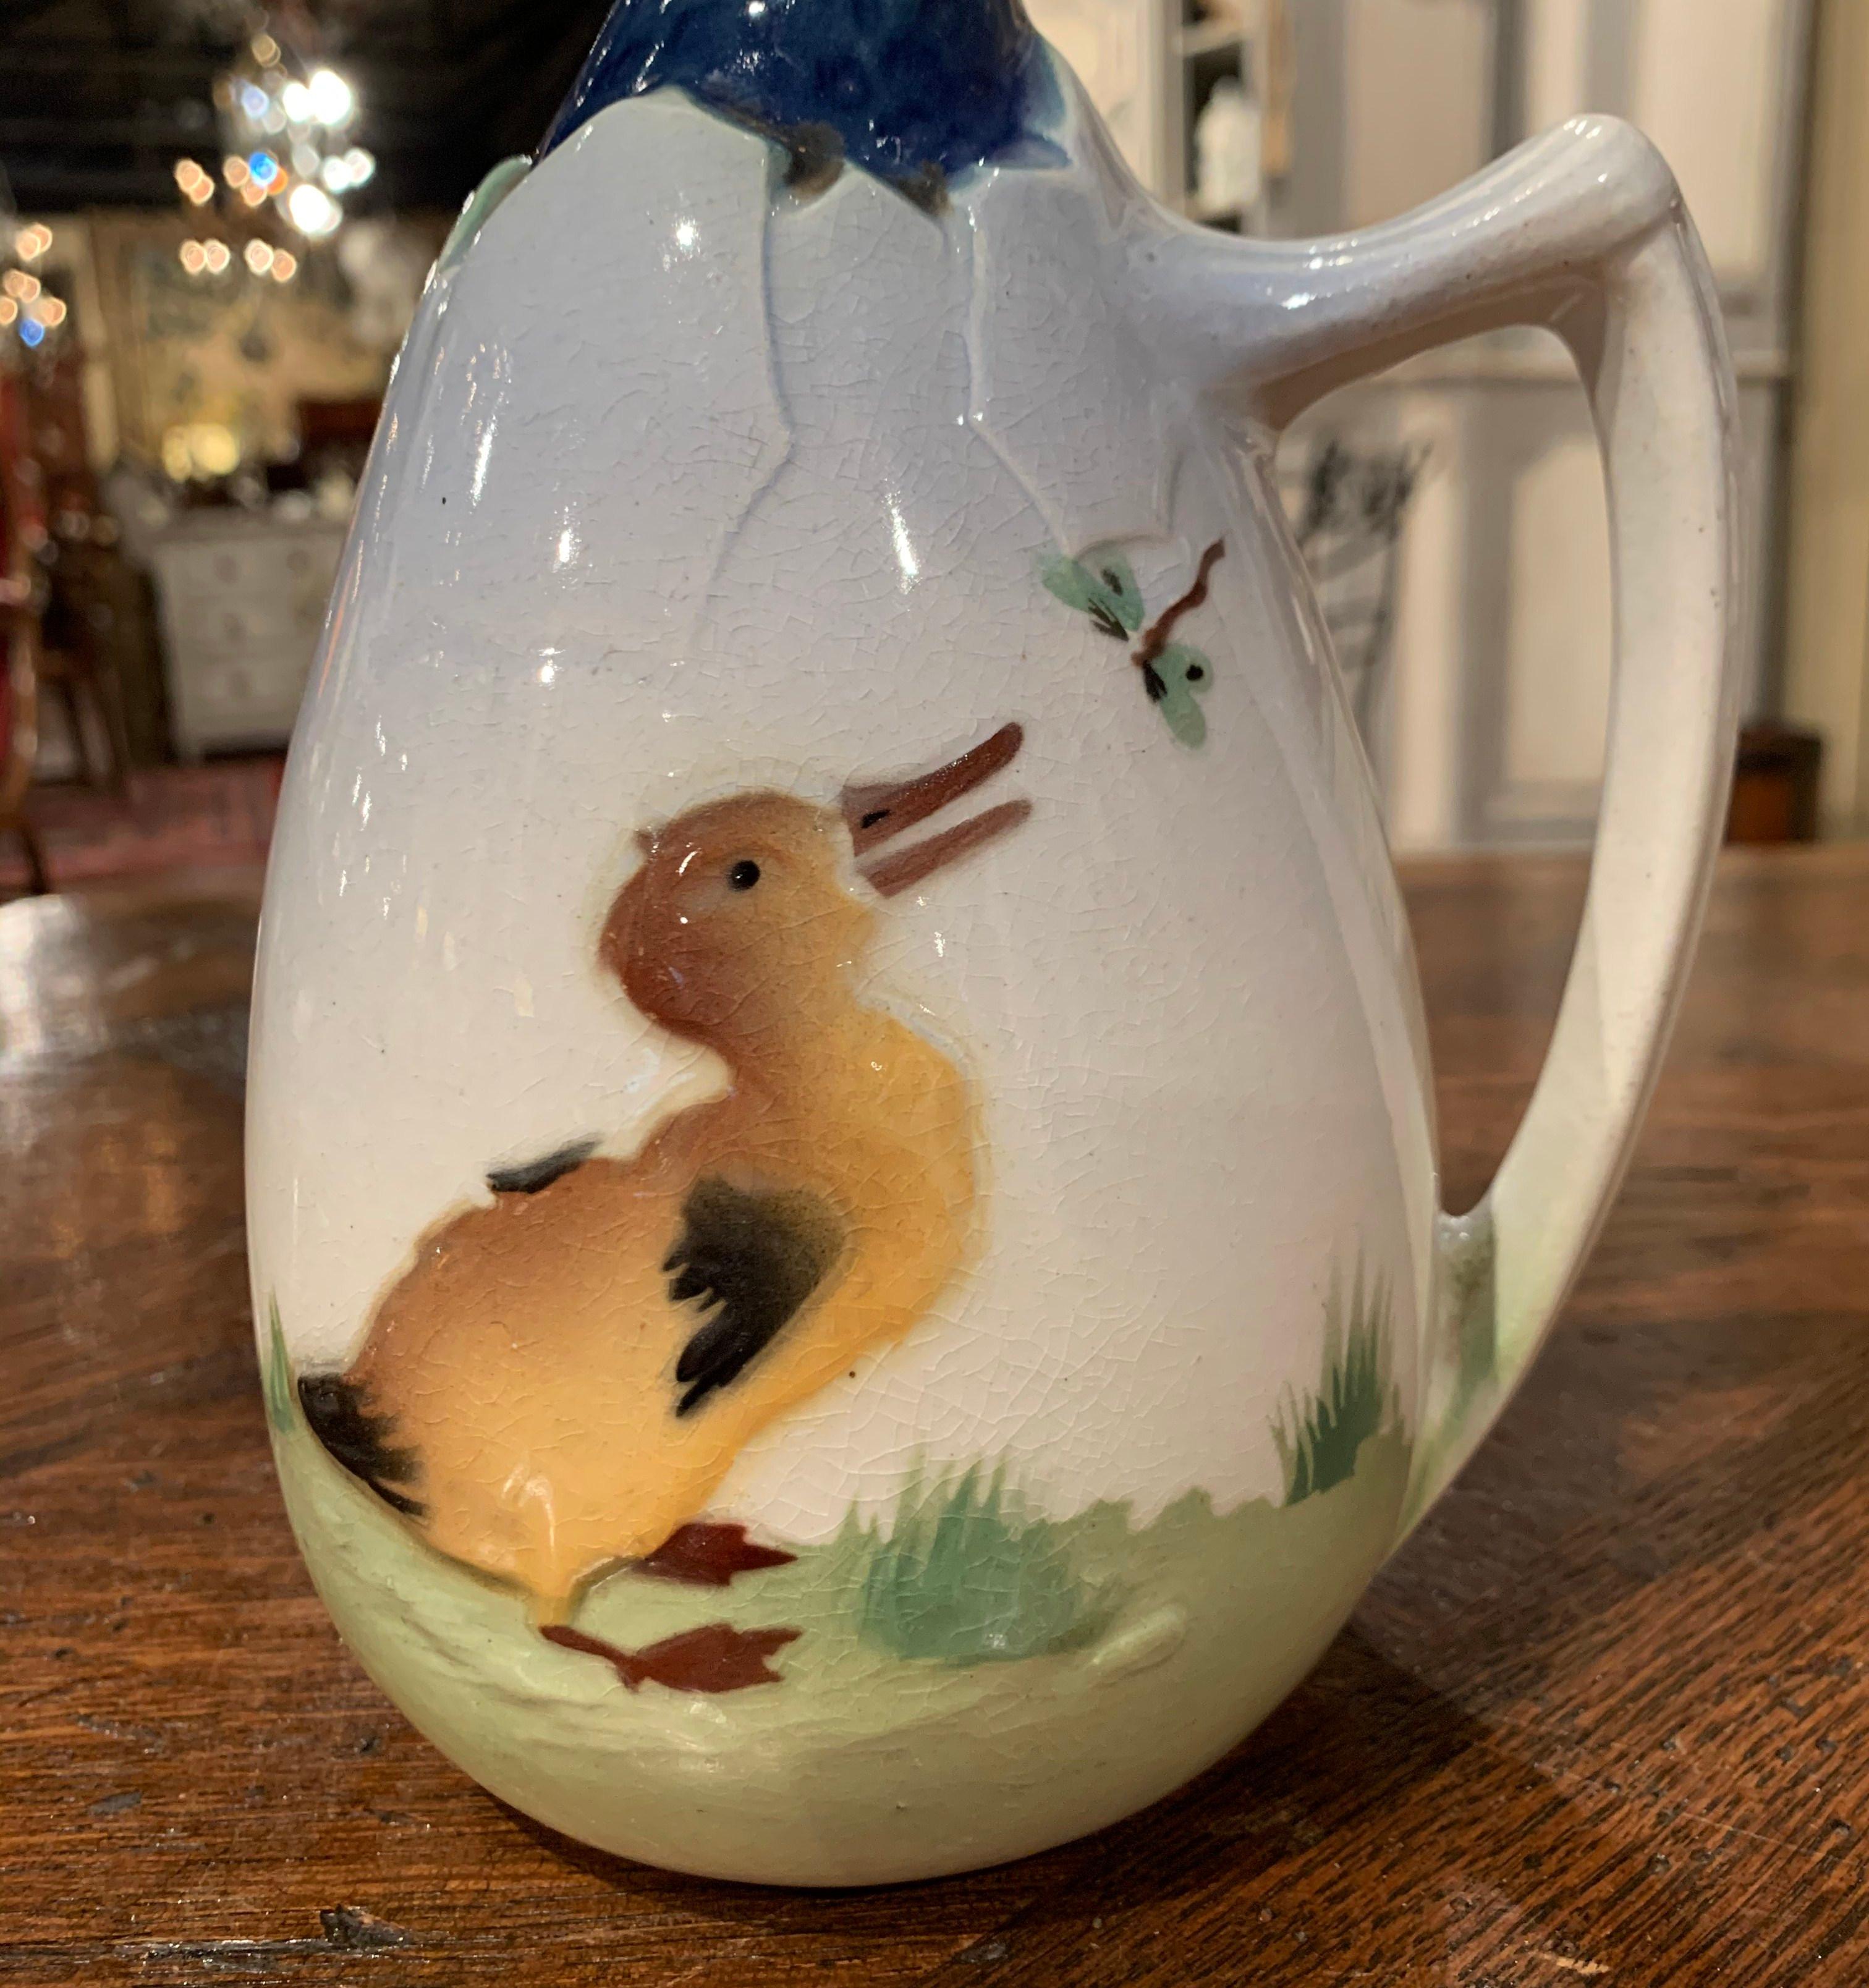 This colorful Majolica water pitcher was sculpted in Saint Clement, France, circa 1890. The charming ceramic jug with spout thru the mouth, is in the shape of a colorful young duck exciting the egg shell. The pitcher is hand painted with a small